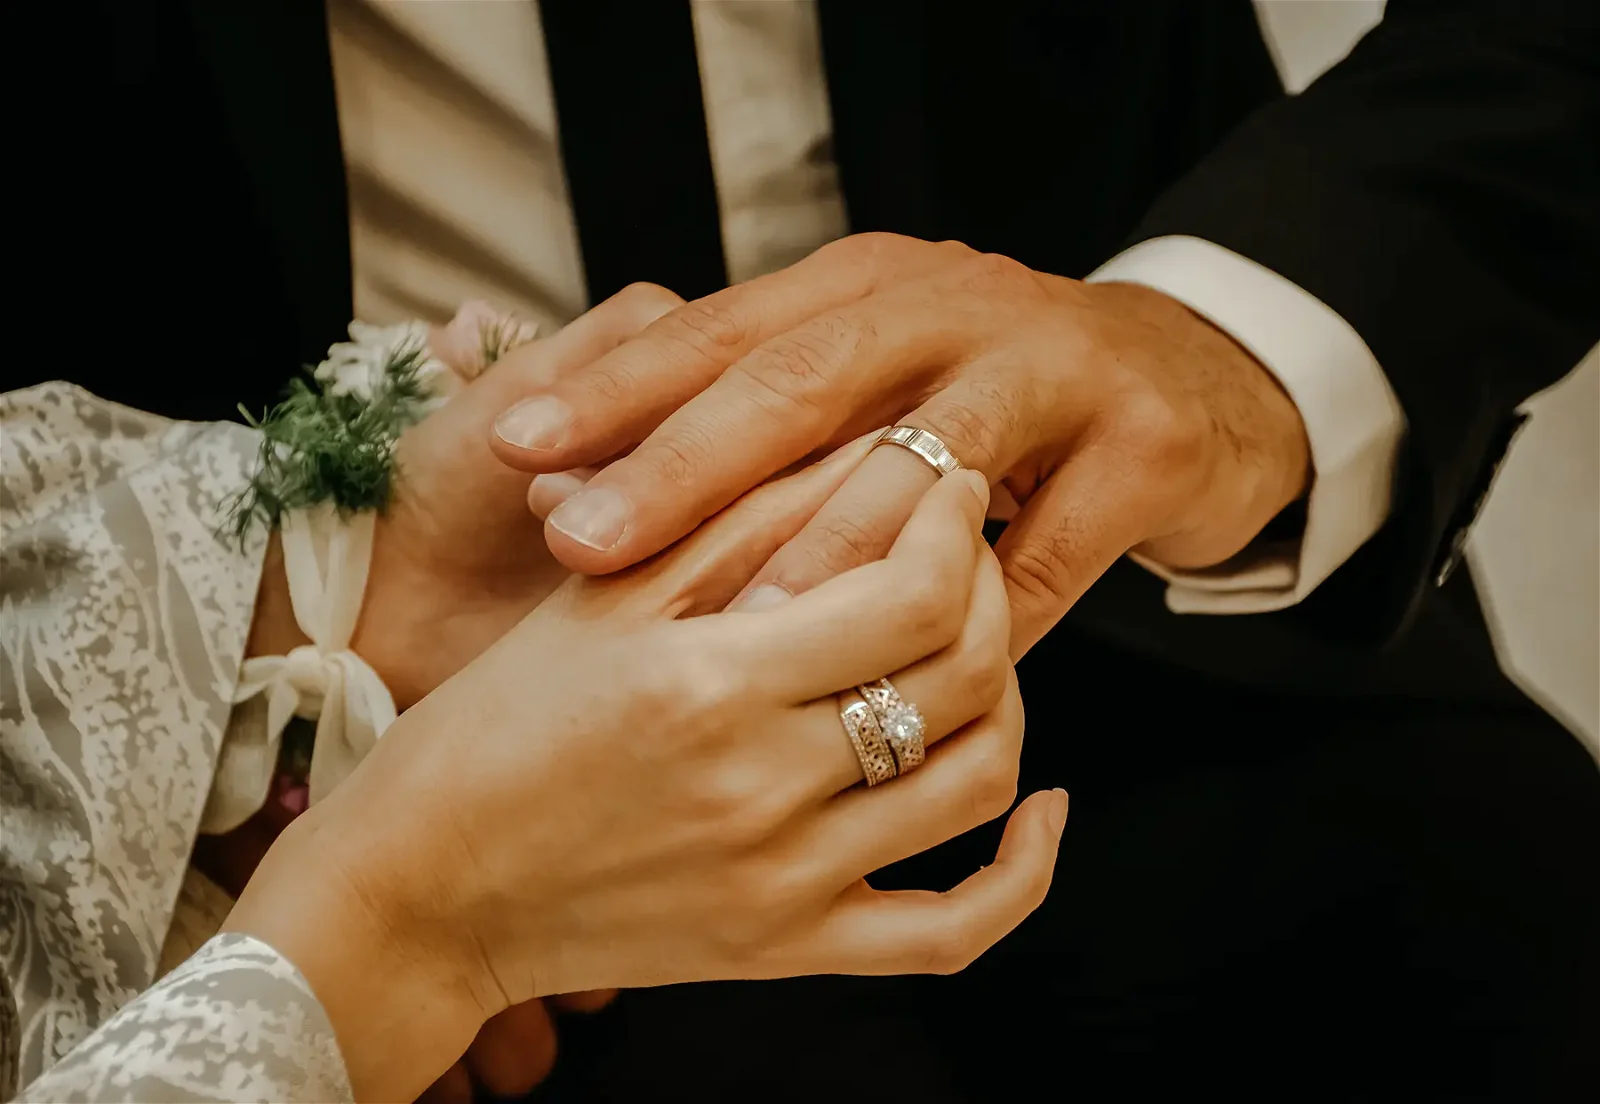 Woman putting a ring on a man's finger